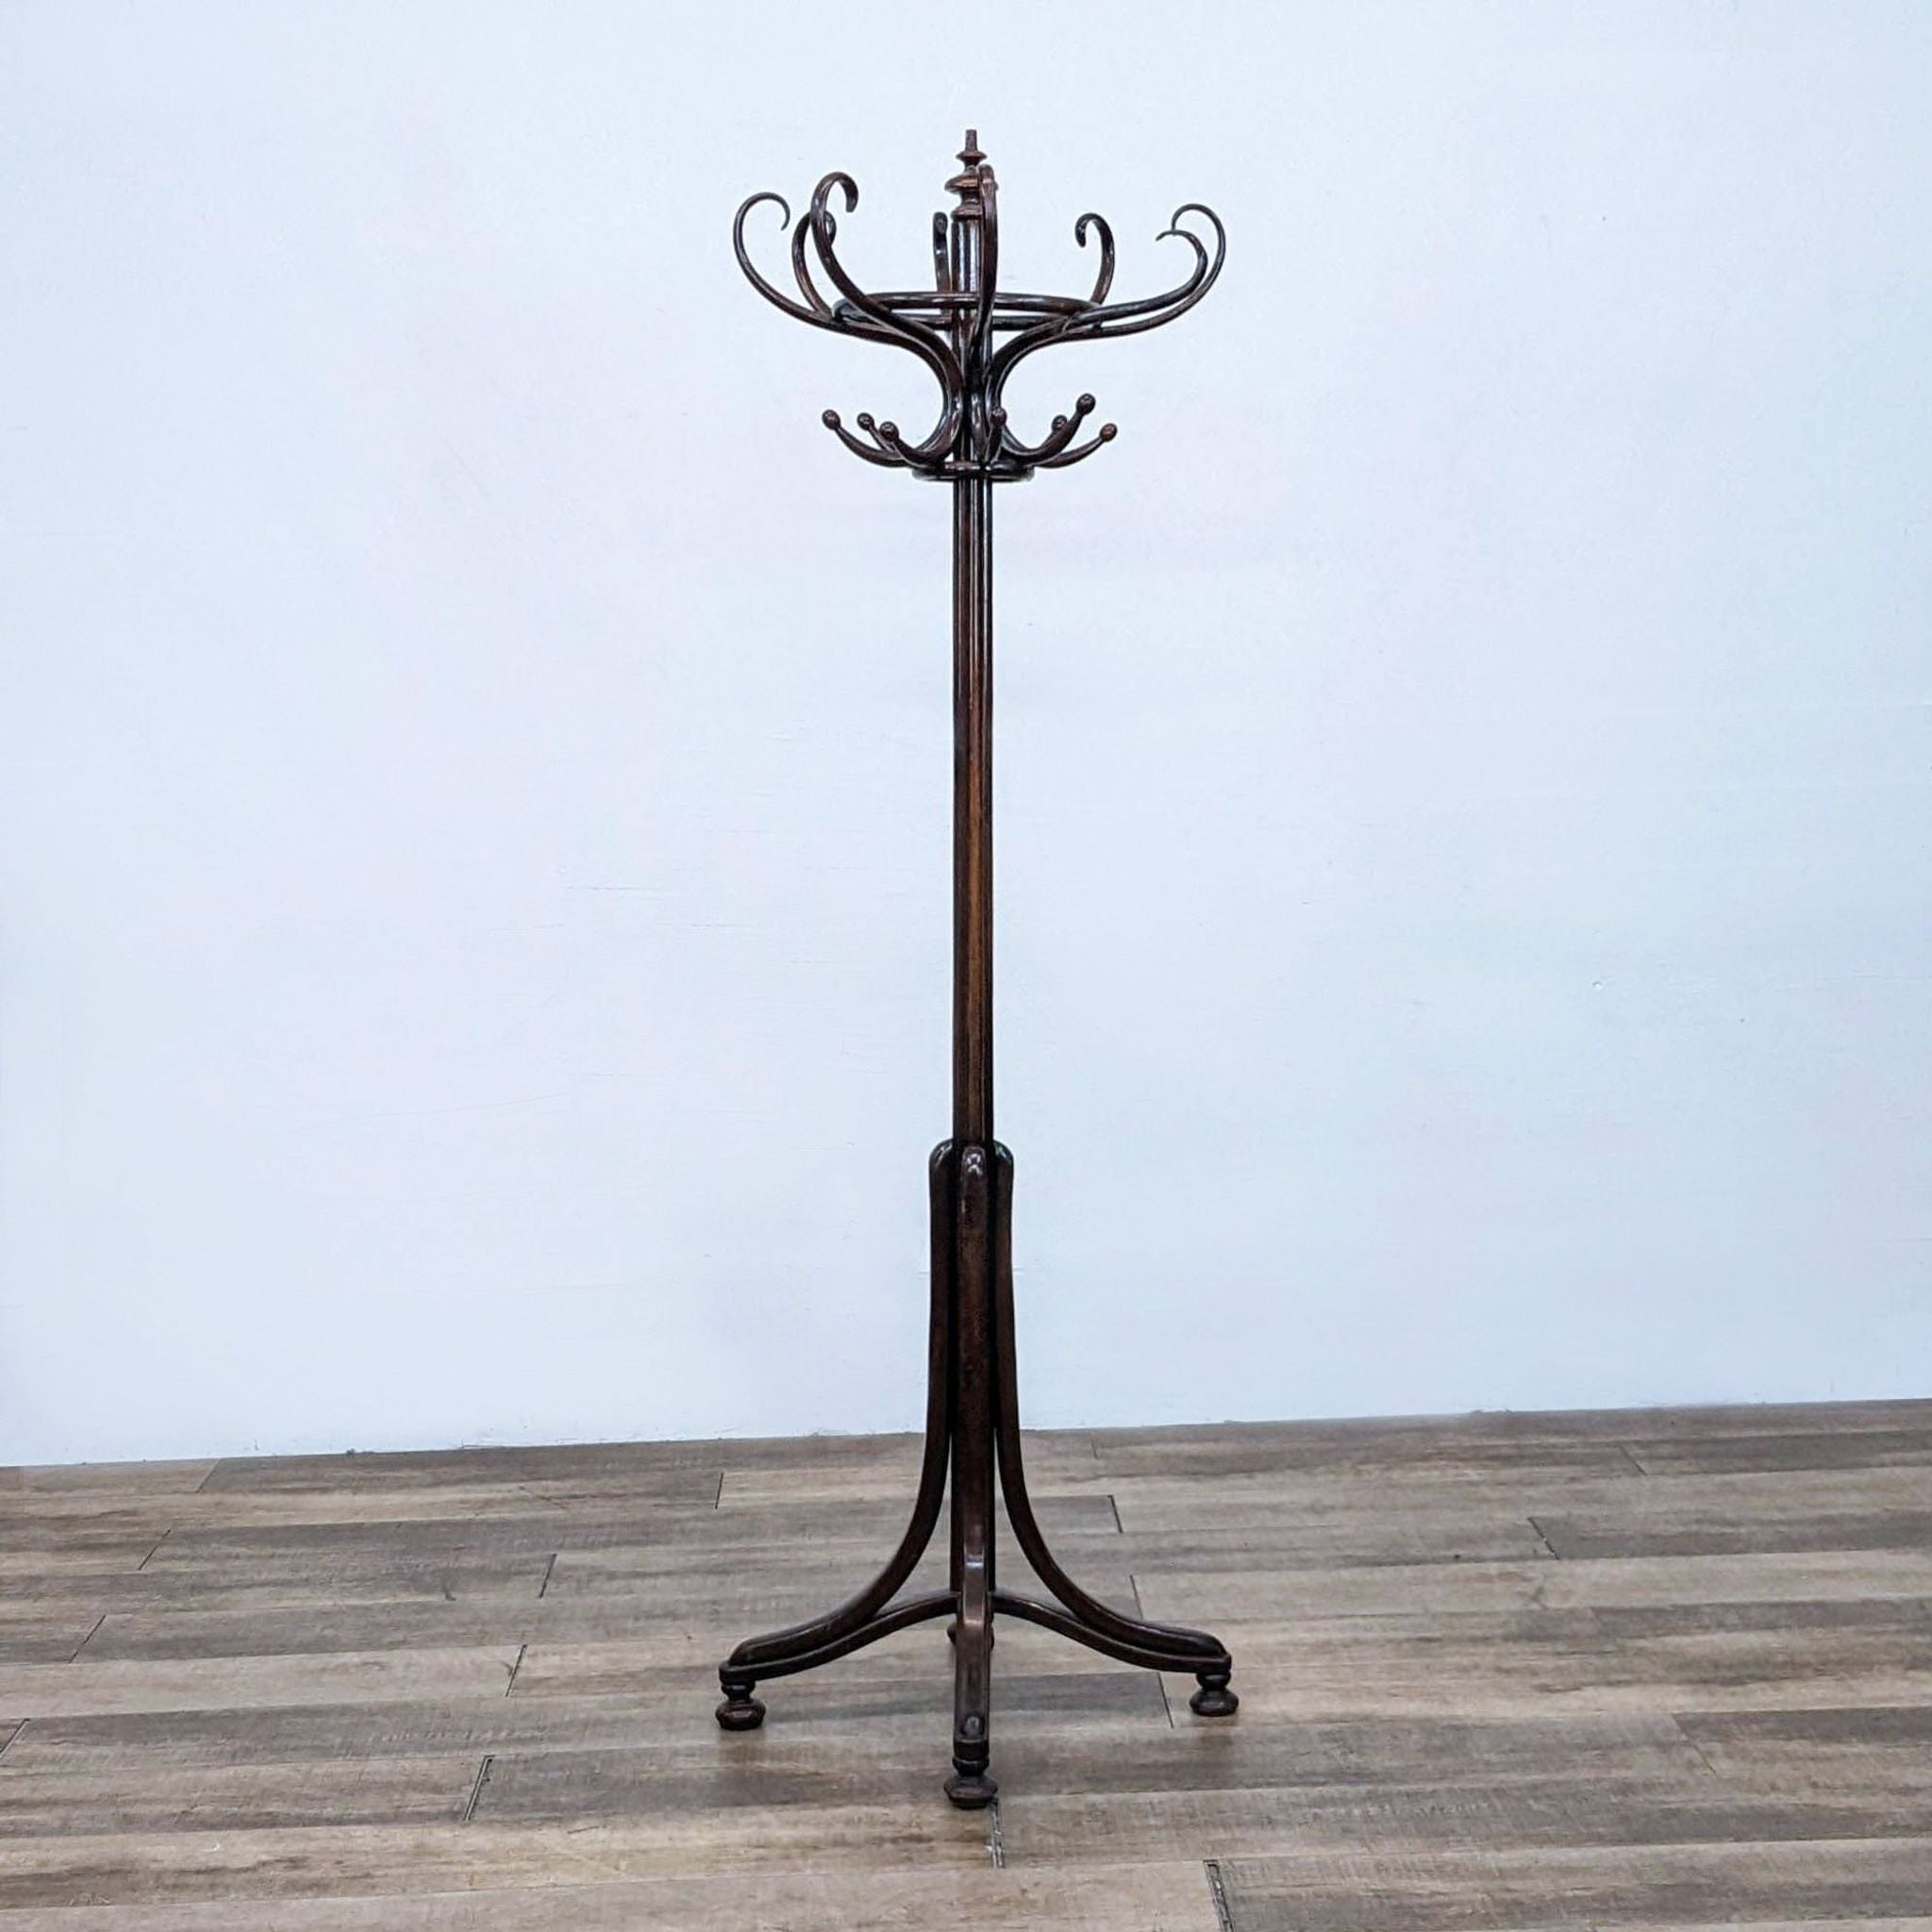 Alt text 1: Antique Thonet art nouveau wooden coat rack with eight intricate S hooks on a decorative top, standing on a three-legged base.